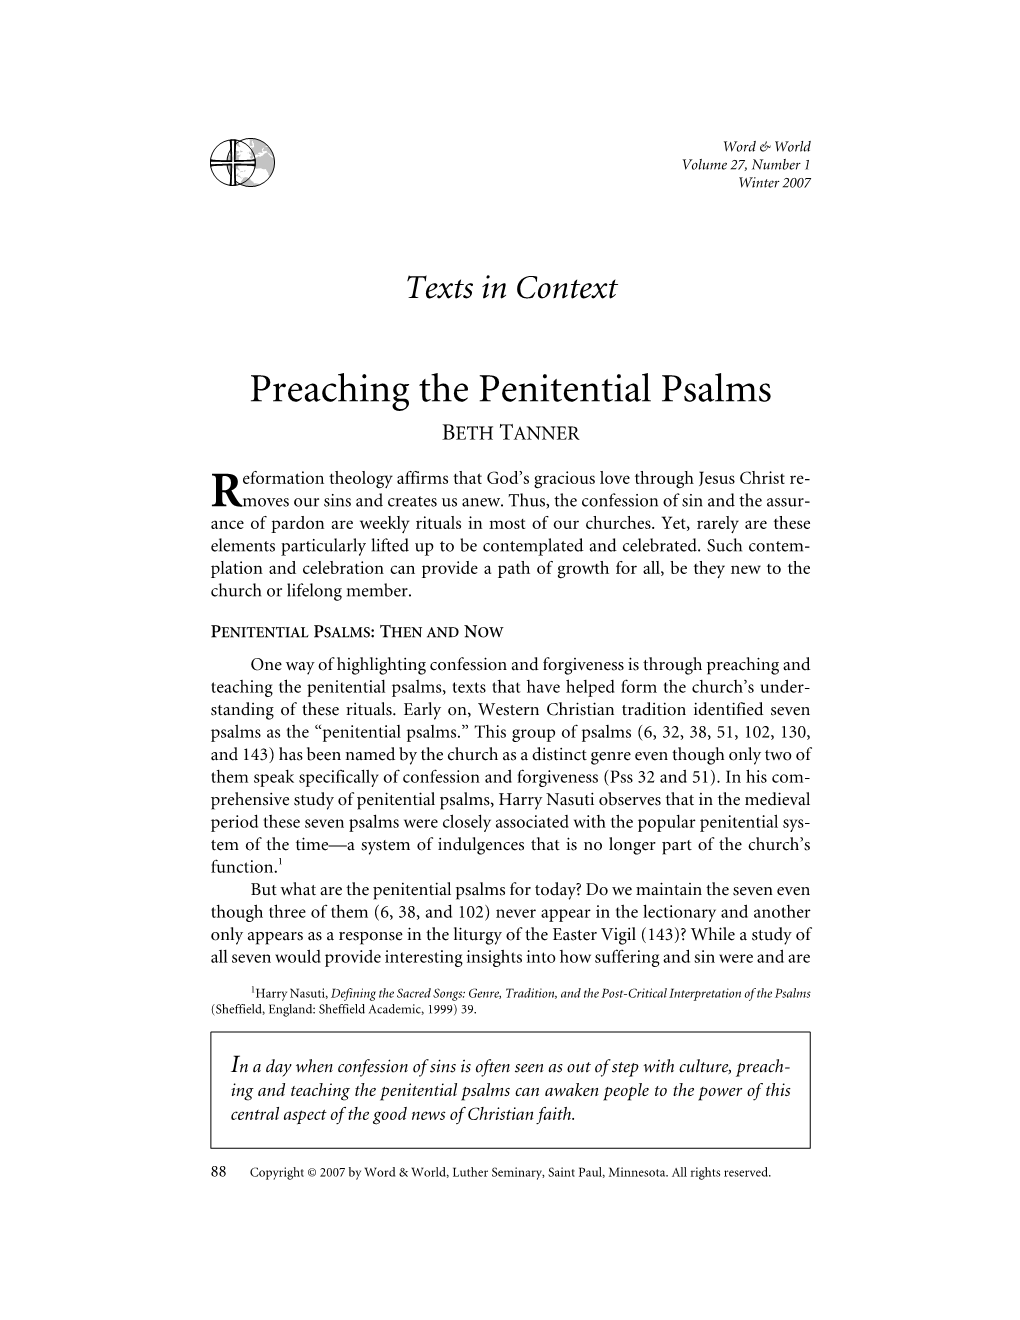 Preaching the Penitential Psalms BETH TANNER